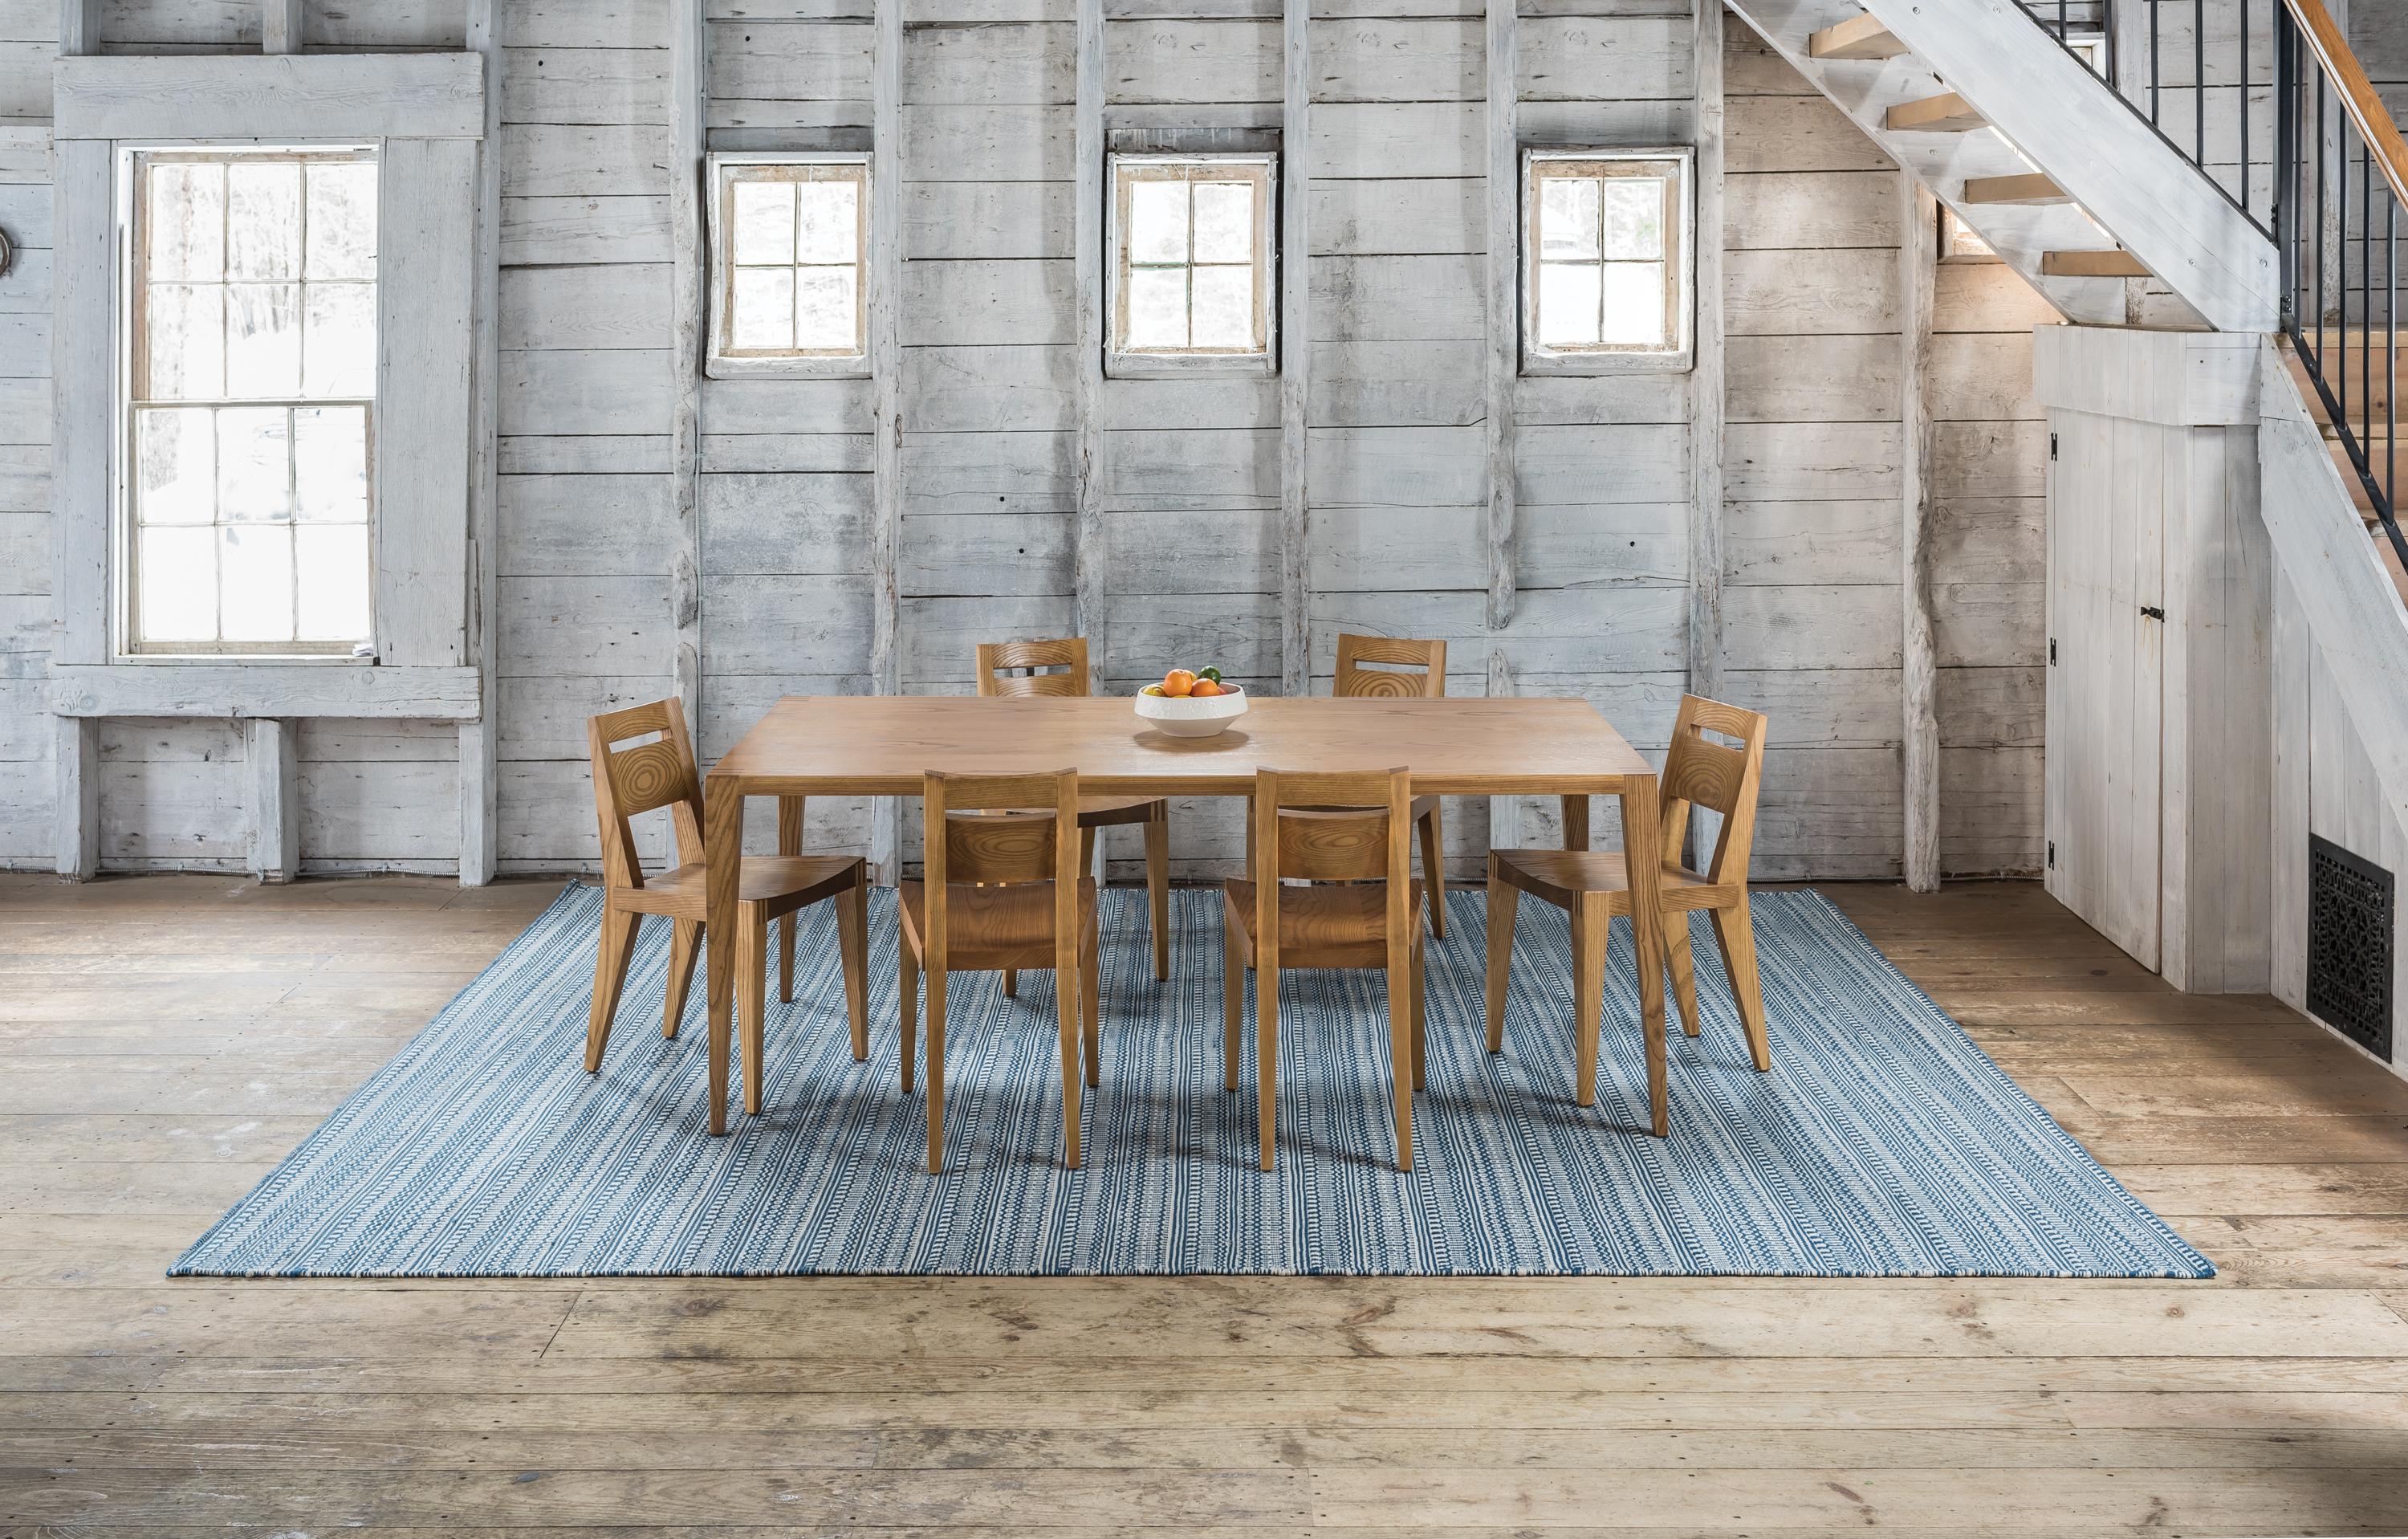 Pure and simple. The Tula dining table exemplifies the power of simplicity, while celebrating traditional craftsmanship and understated design. Solid wood construction exudes a soulful, hearty confidence, while exposed bridal joinery highlights our